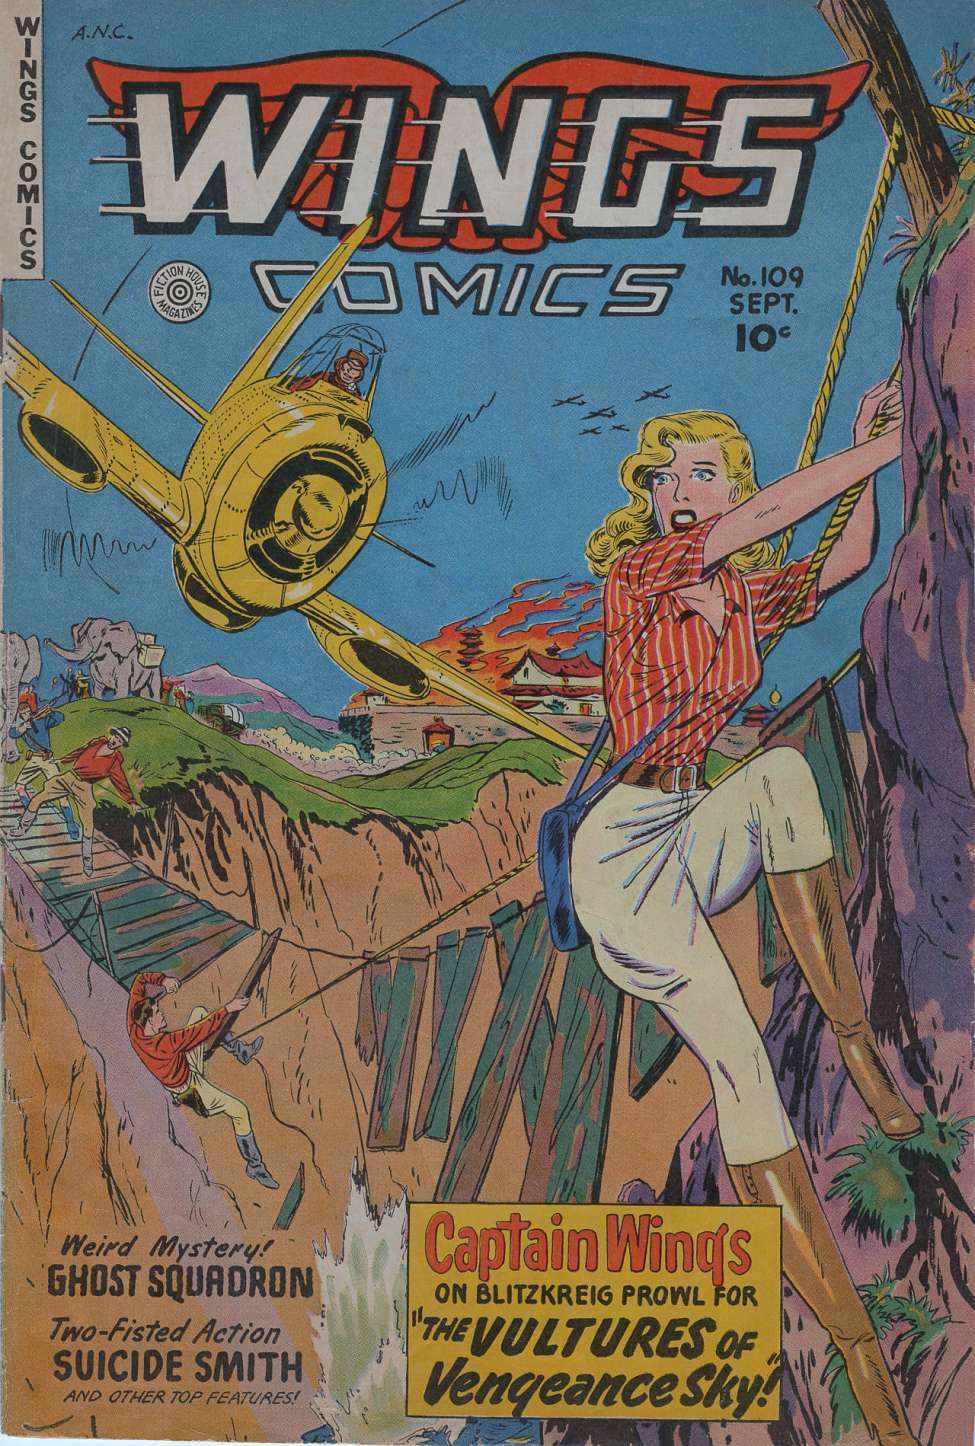 Book Cover For Wings Comics 109 - Version 2